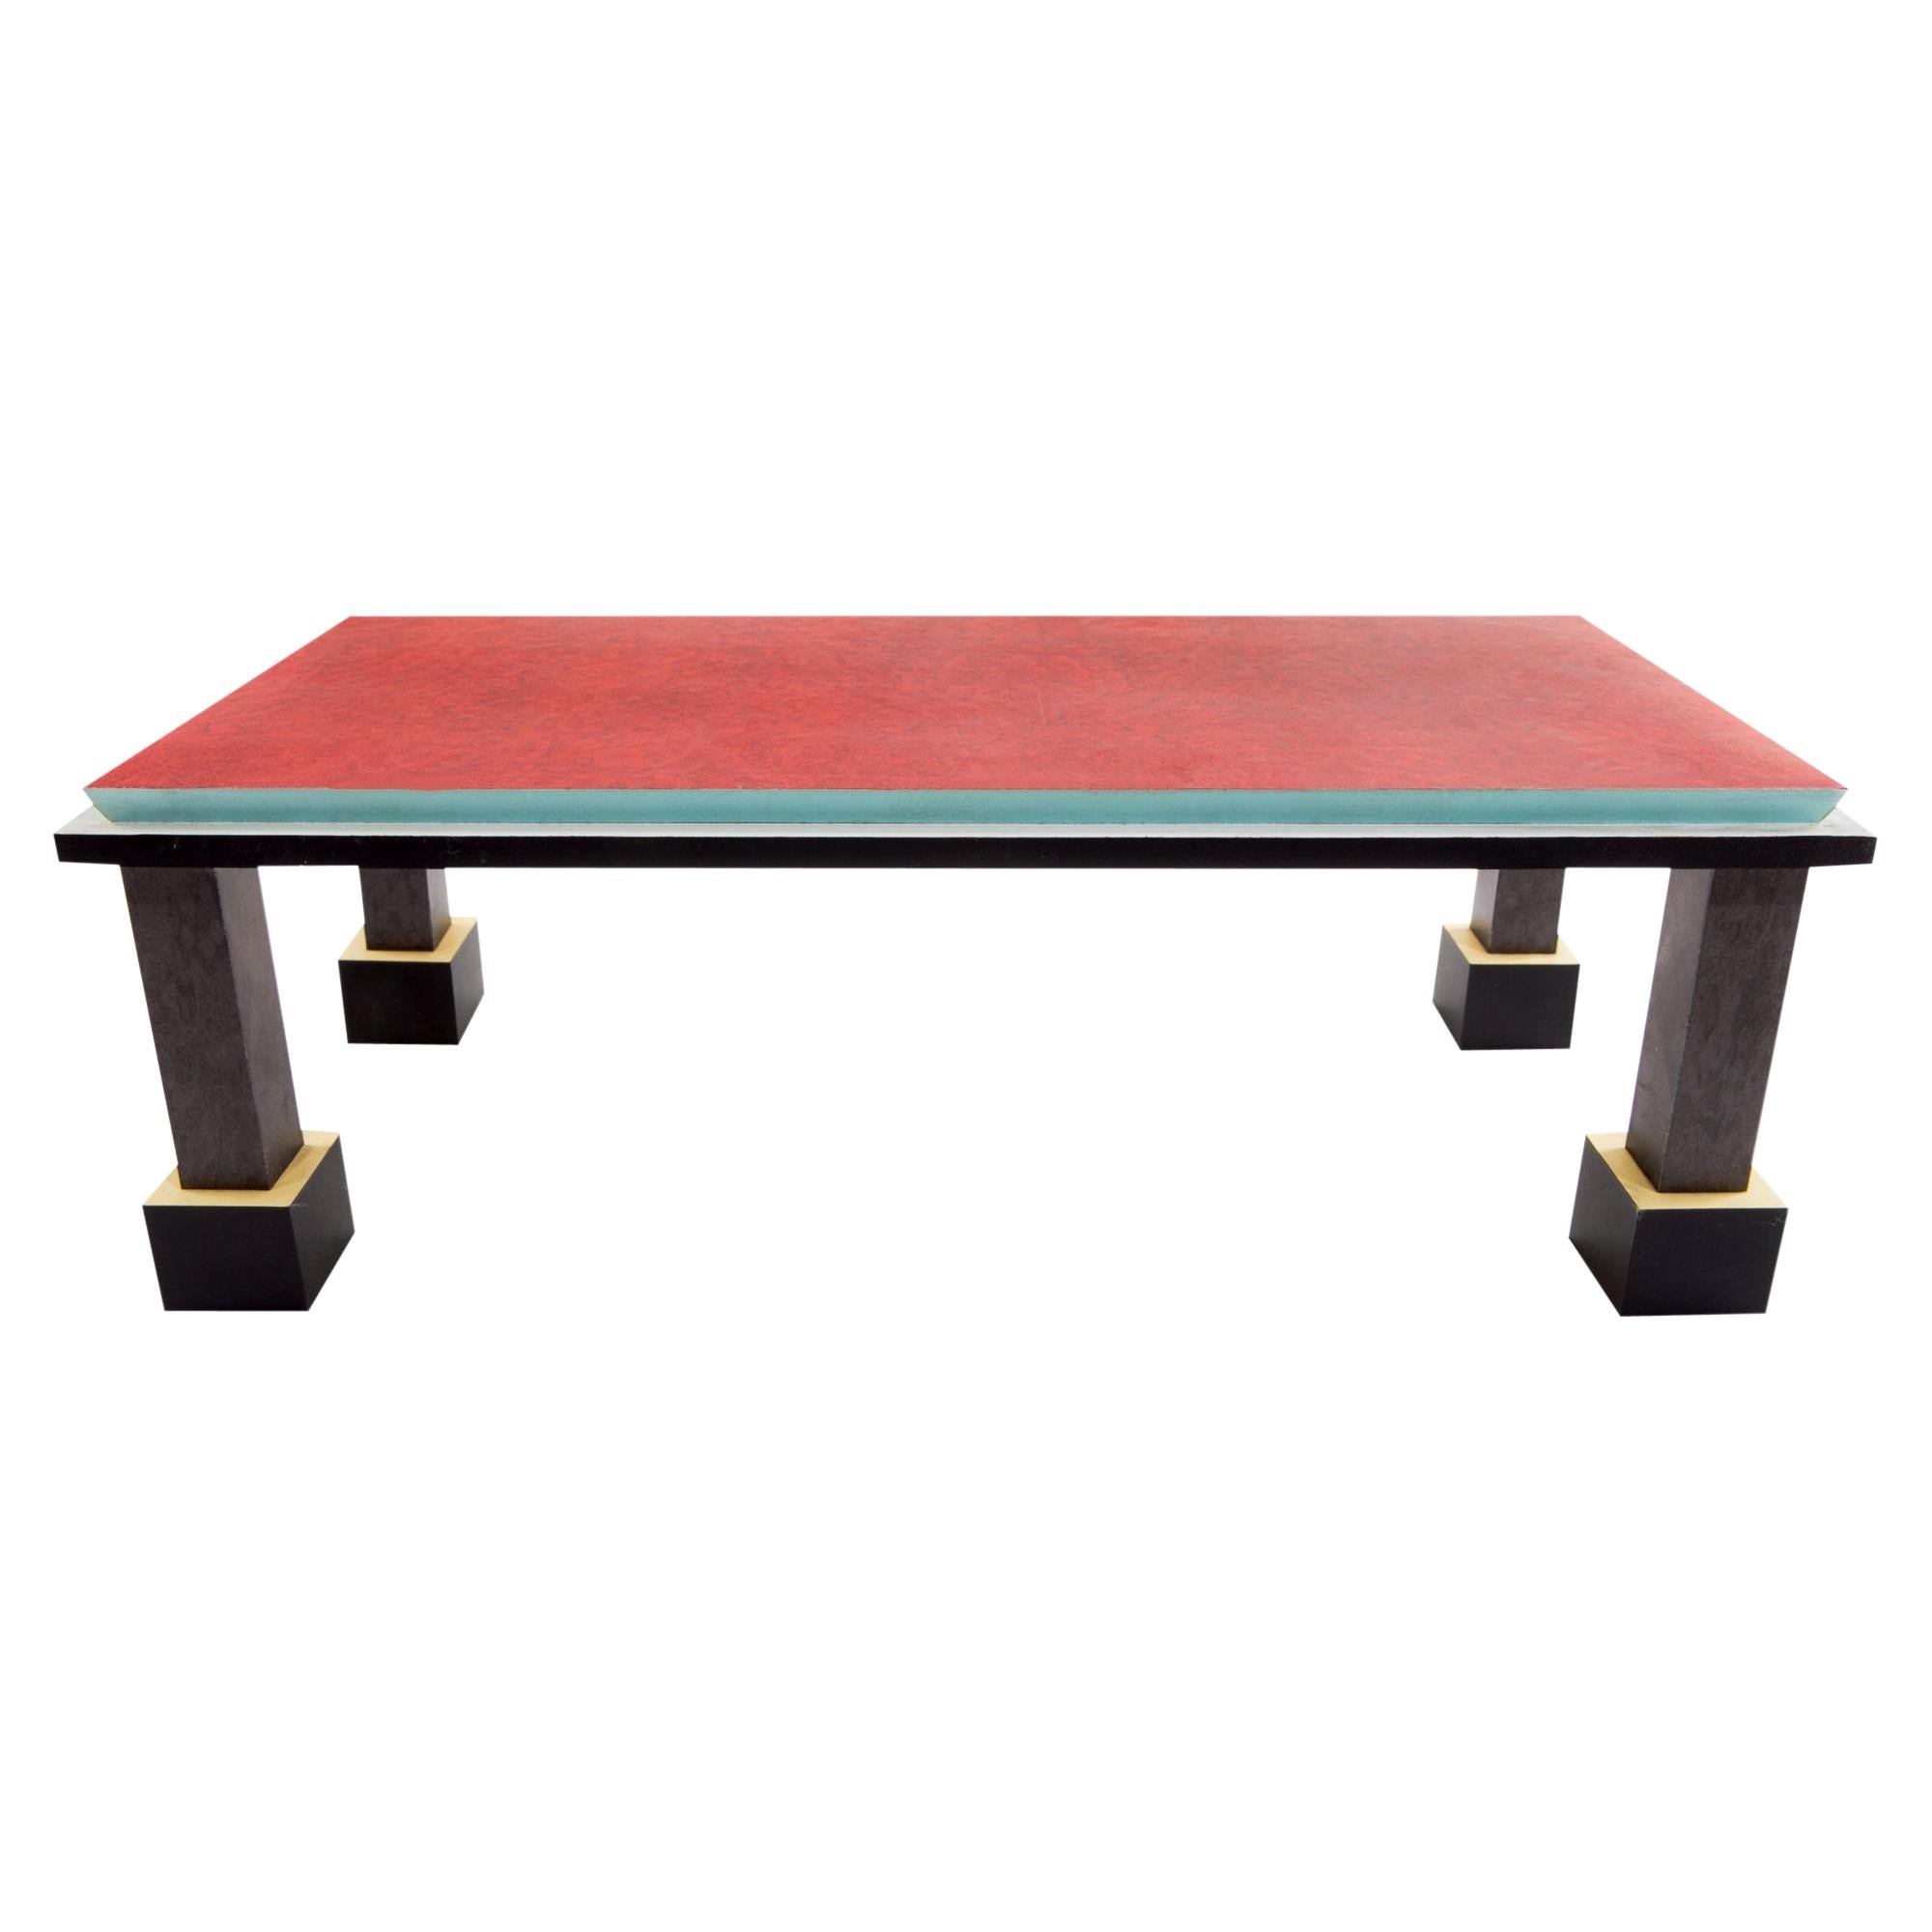 Palm Springs Briar Dining Table by Ettore Sottsass for Memphis Milano Collection